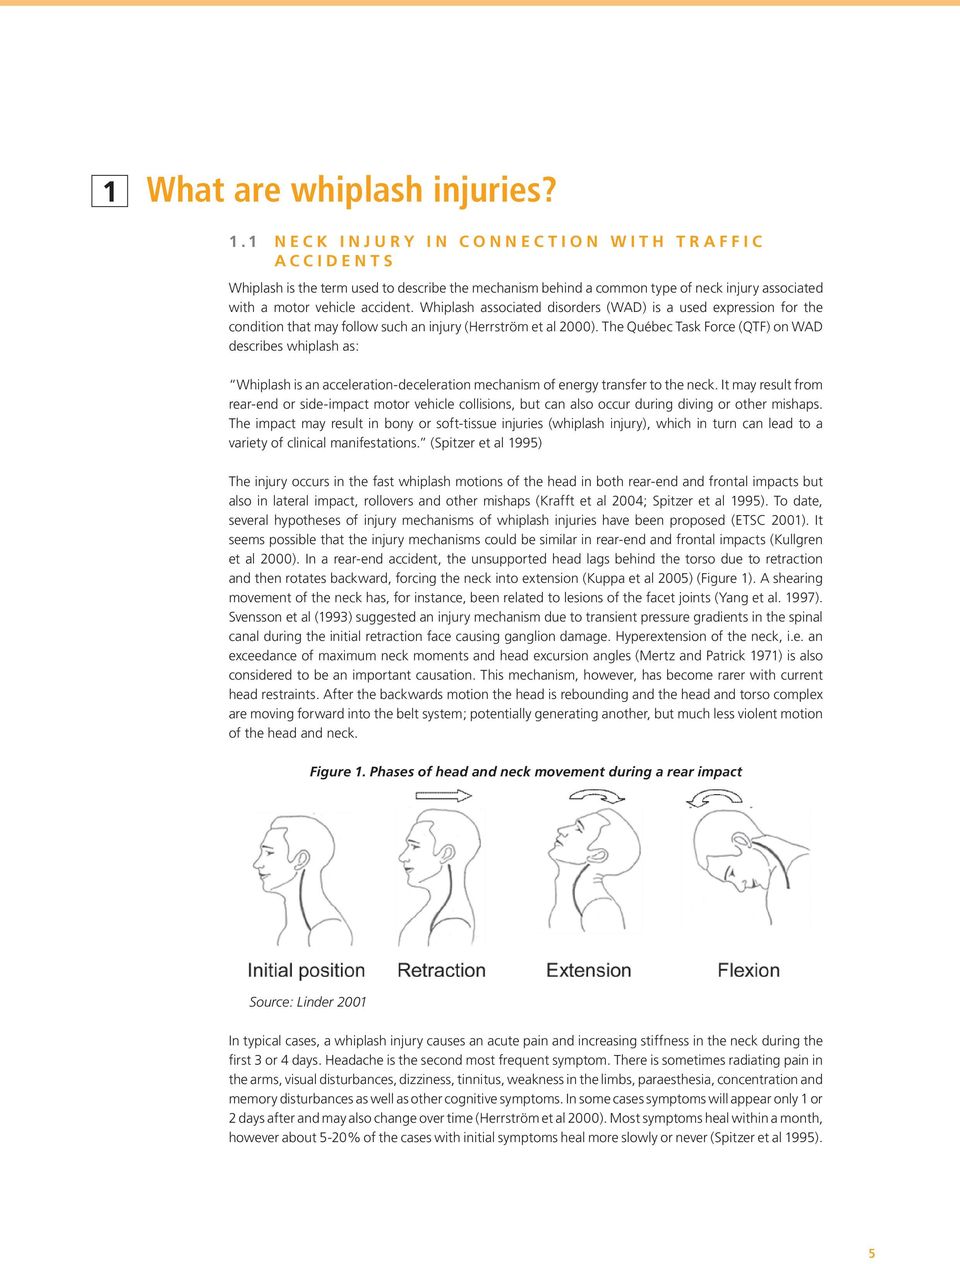 Whiplash associated disorders (WAD) is a used expression for the condition that may follow such an injury (Herrström et al 2000).